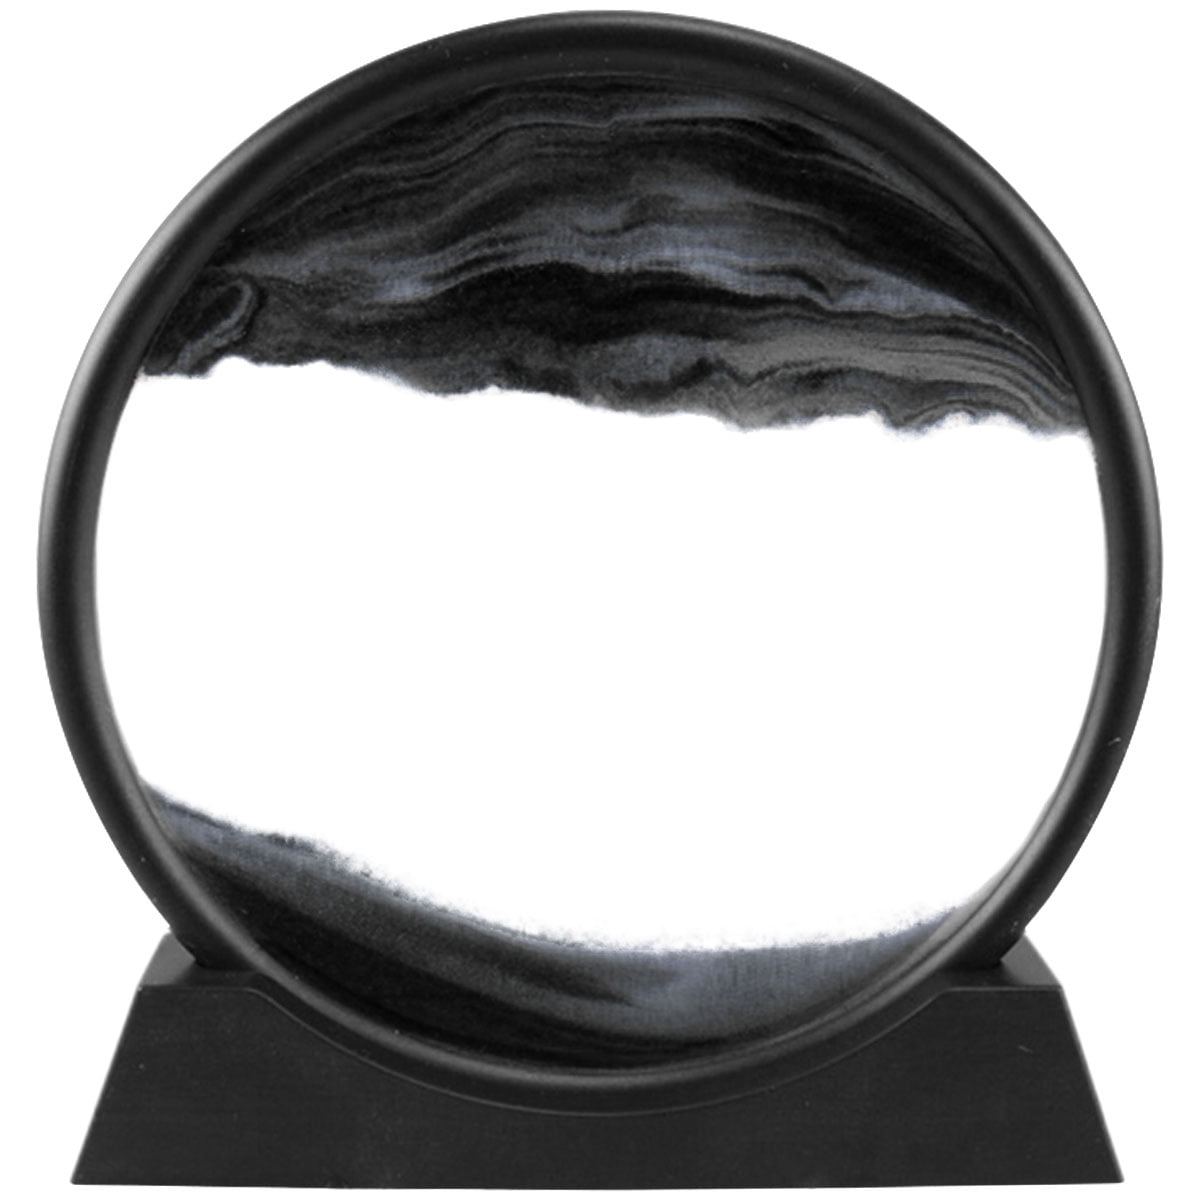 7Inch Round 3D Deep Sea Sandscape in Motion Display Flowing Sand Frame BESPORTBLE Moving Sand Art Picture Desktop Sand Art for Home Decor and Office